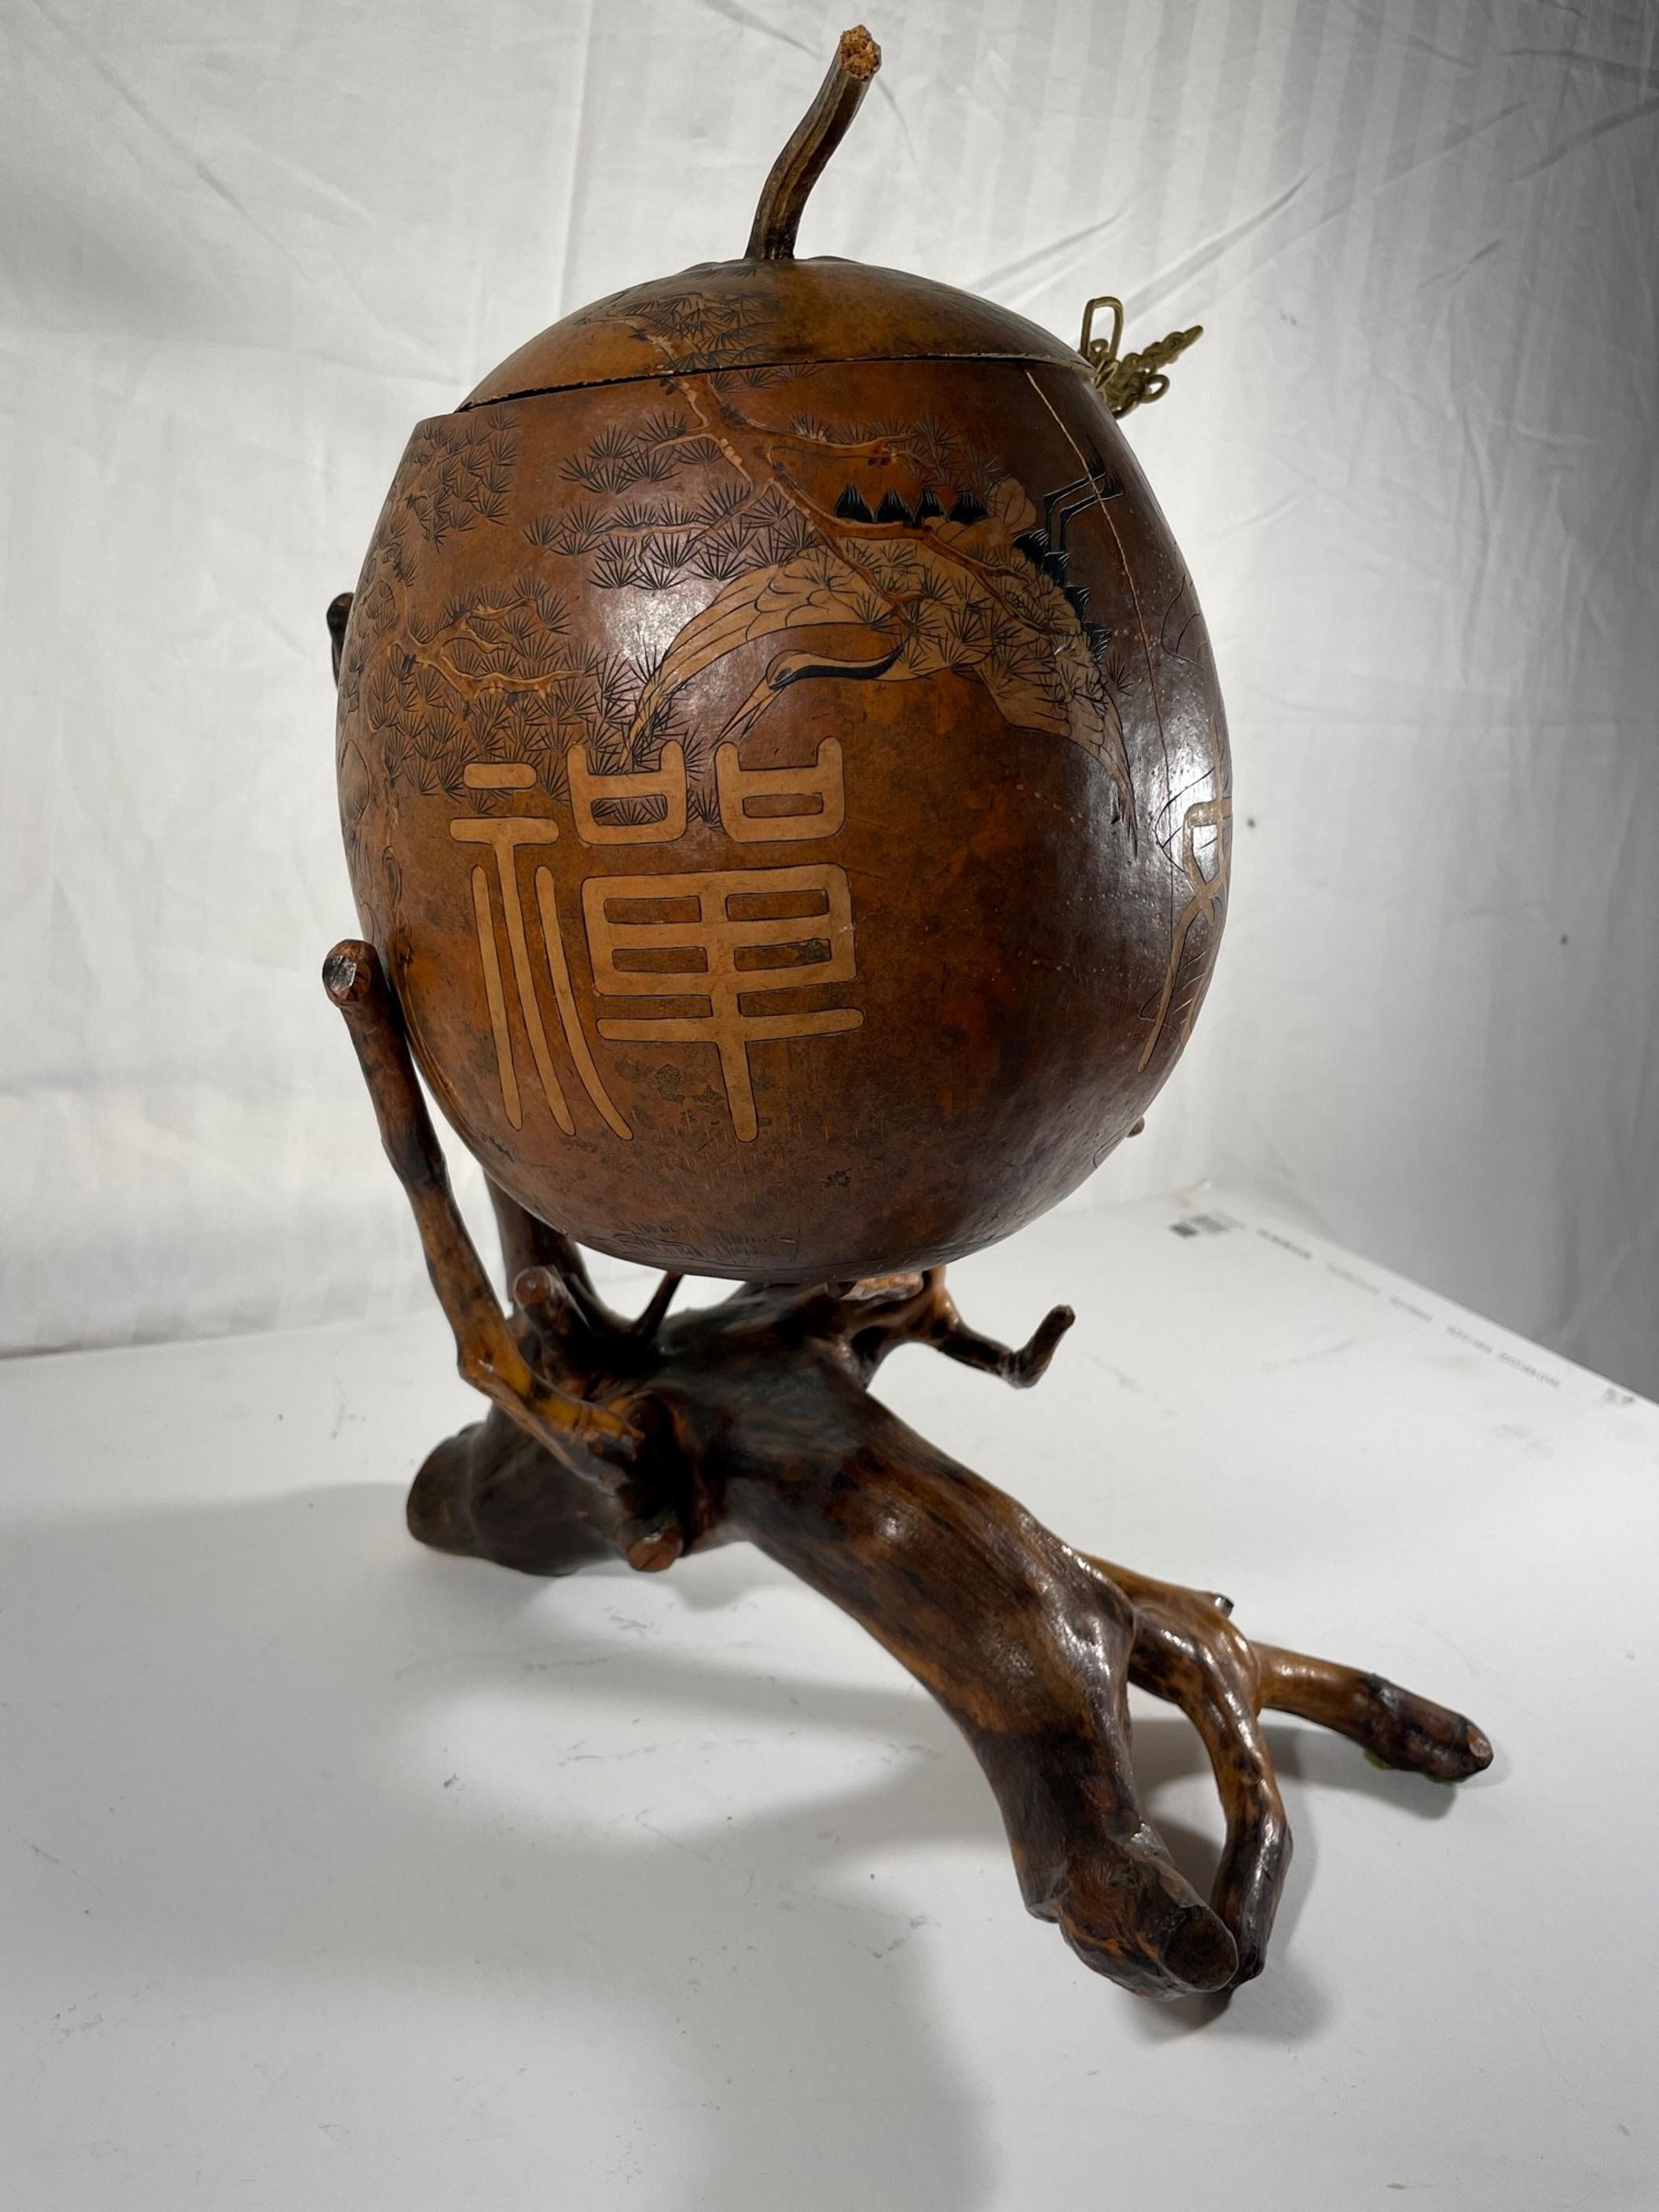 Chinese Lanzhou Gourd carving with macrame cord on root stand sculpture.

Early 20th century large engraved and carved Chinese Lanzhou gourd. Dramatic design with symbols and letters, executed in a delicate technique on the surface of the gourd.